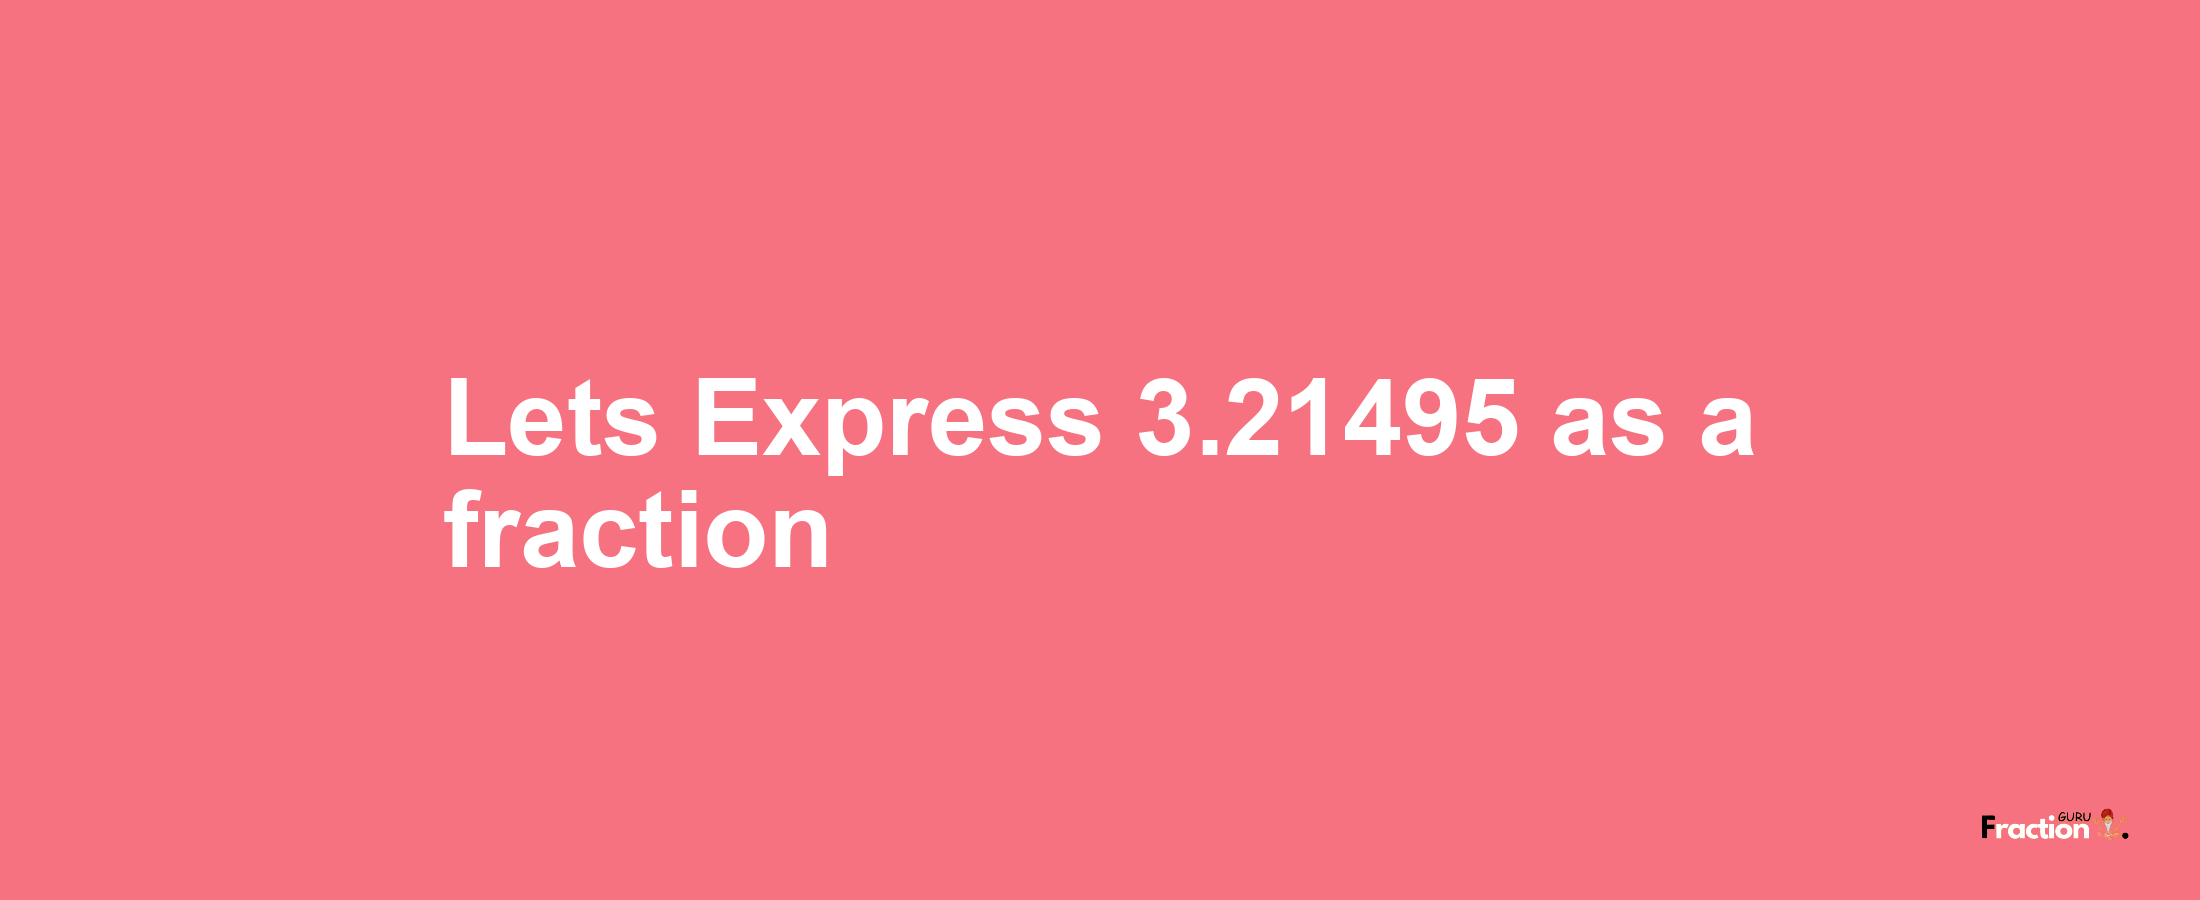 Lets Express 3.21495 as afraction